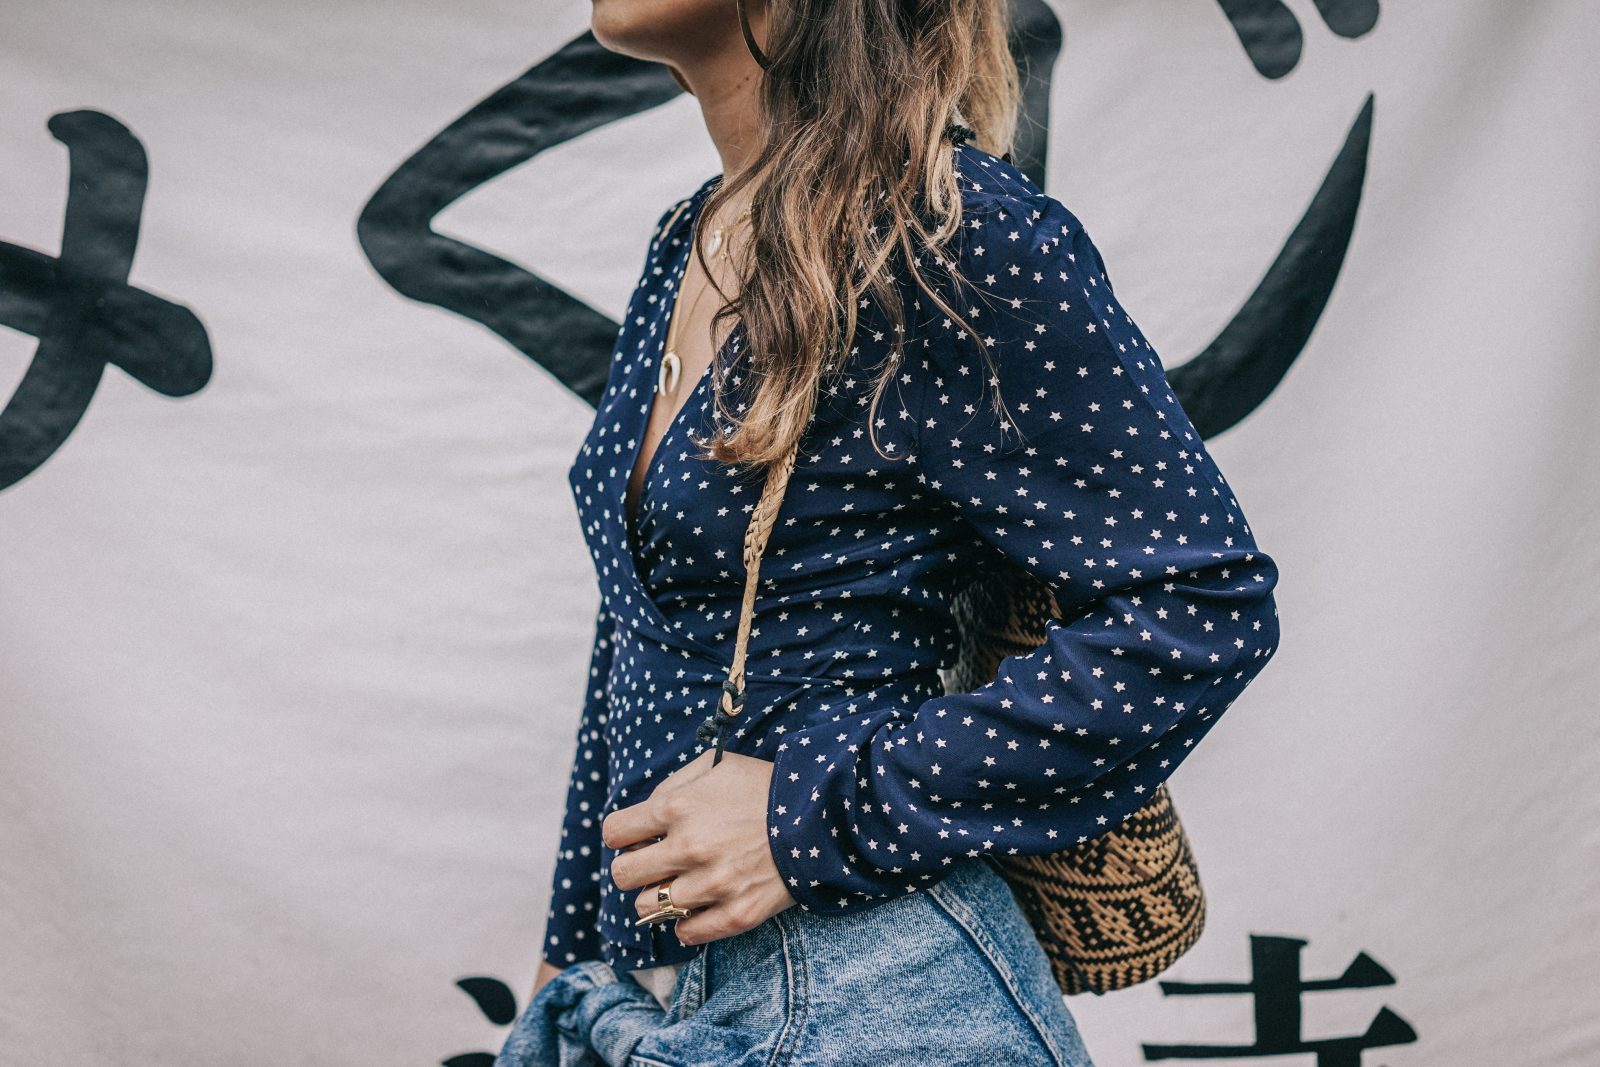 Tokyo_Travel_Guide-Outfit-Collage_Vintage-Street_Style-Reformation_Shorts-Realisation_Par_Stars_Blouse-Sneakers-Flea_Market_Backpack-28